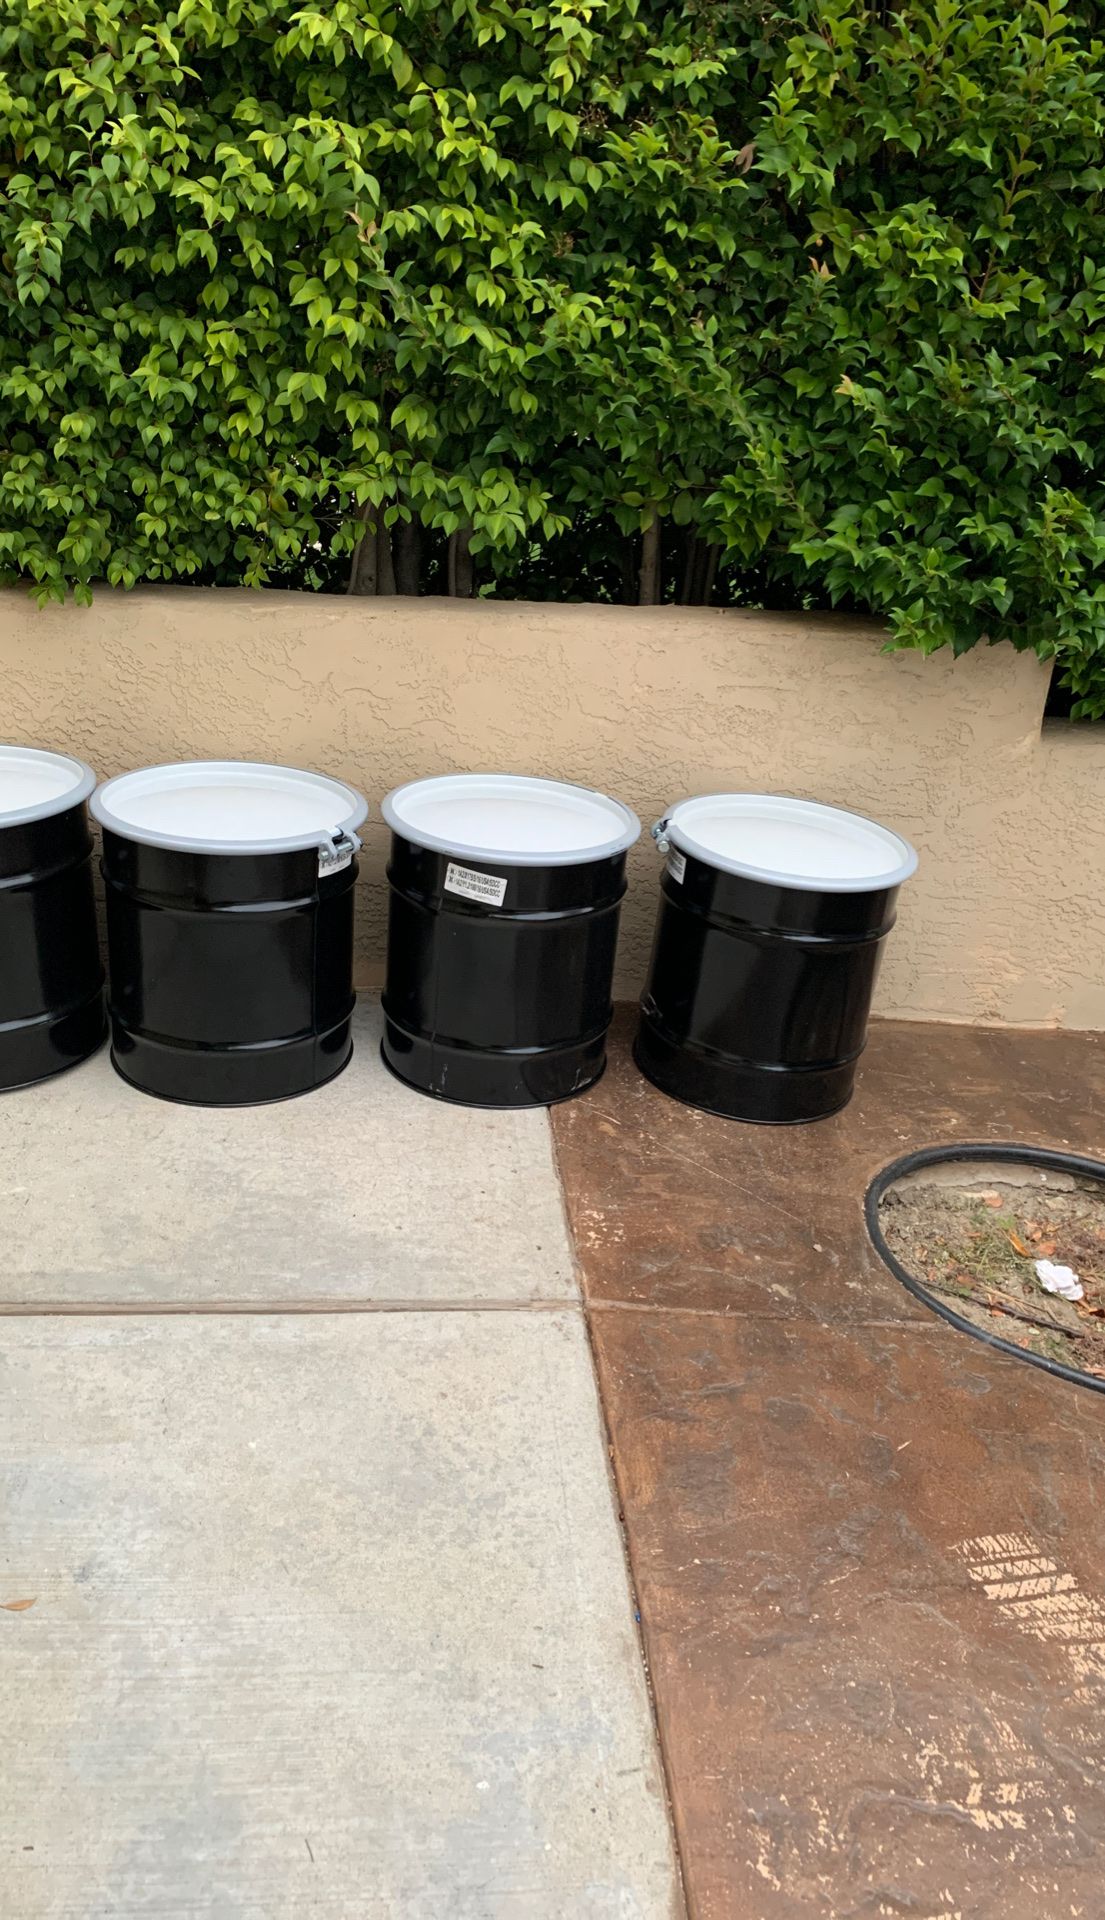 New. 20 gallons of barrel Drums